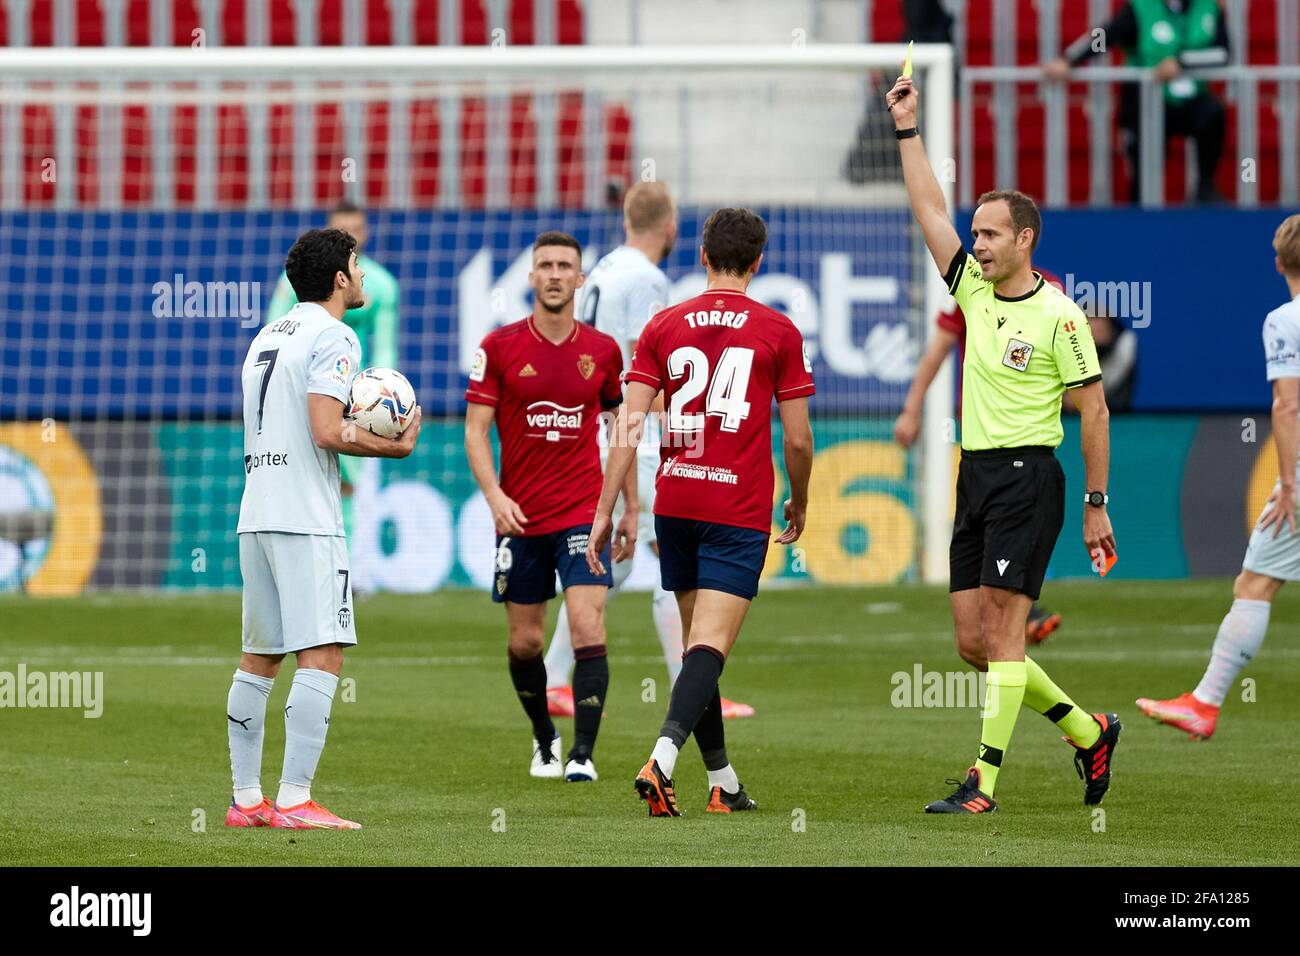 Pamplona, Spain. 21st Apr, 2021. Gonzalo Guedes (midfielder; Valencia CF) receives a yellow card from a referee during the Spanish La Liga Santander, match between CA Osasuna and Valencia CF at the Sadar stadium. (Final score : CA Osasuna 3-1 Valencia CF) Credit: SOPA Images Limited/Alamy Live News Stock Photo